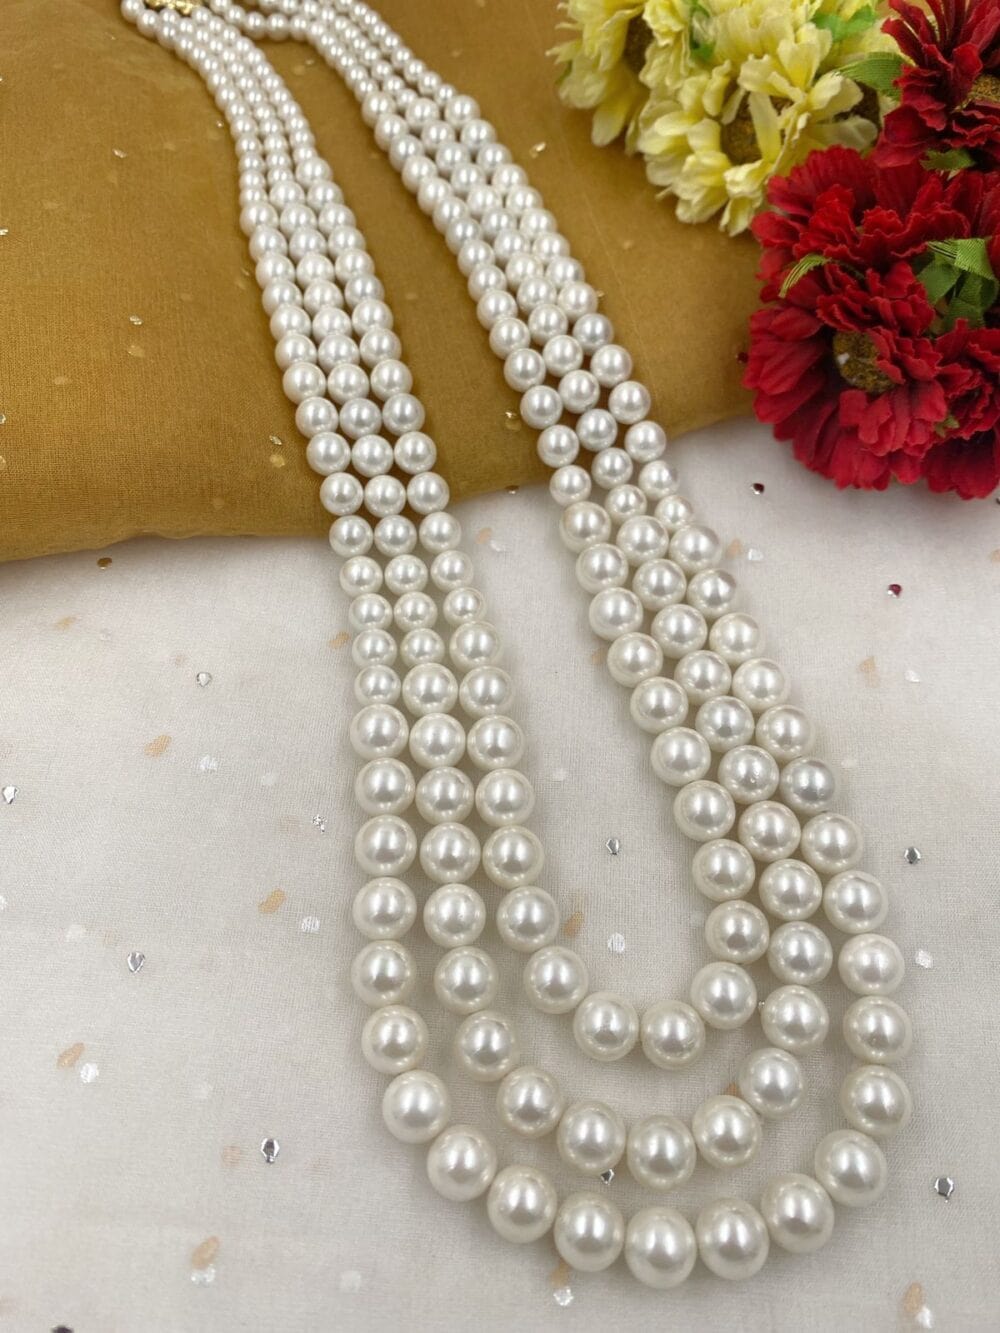 Traditional Handcrafted Triple Layered Real Shell Pearl Beads Necklace For Grooms By Gehna Shop Beads Jewellery